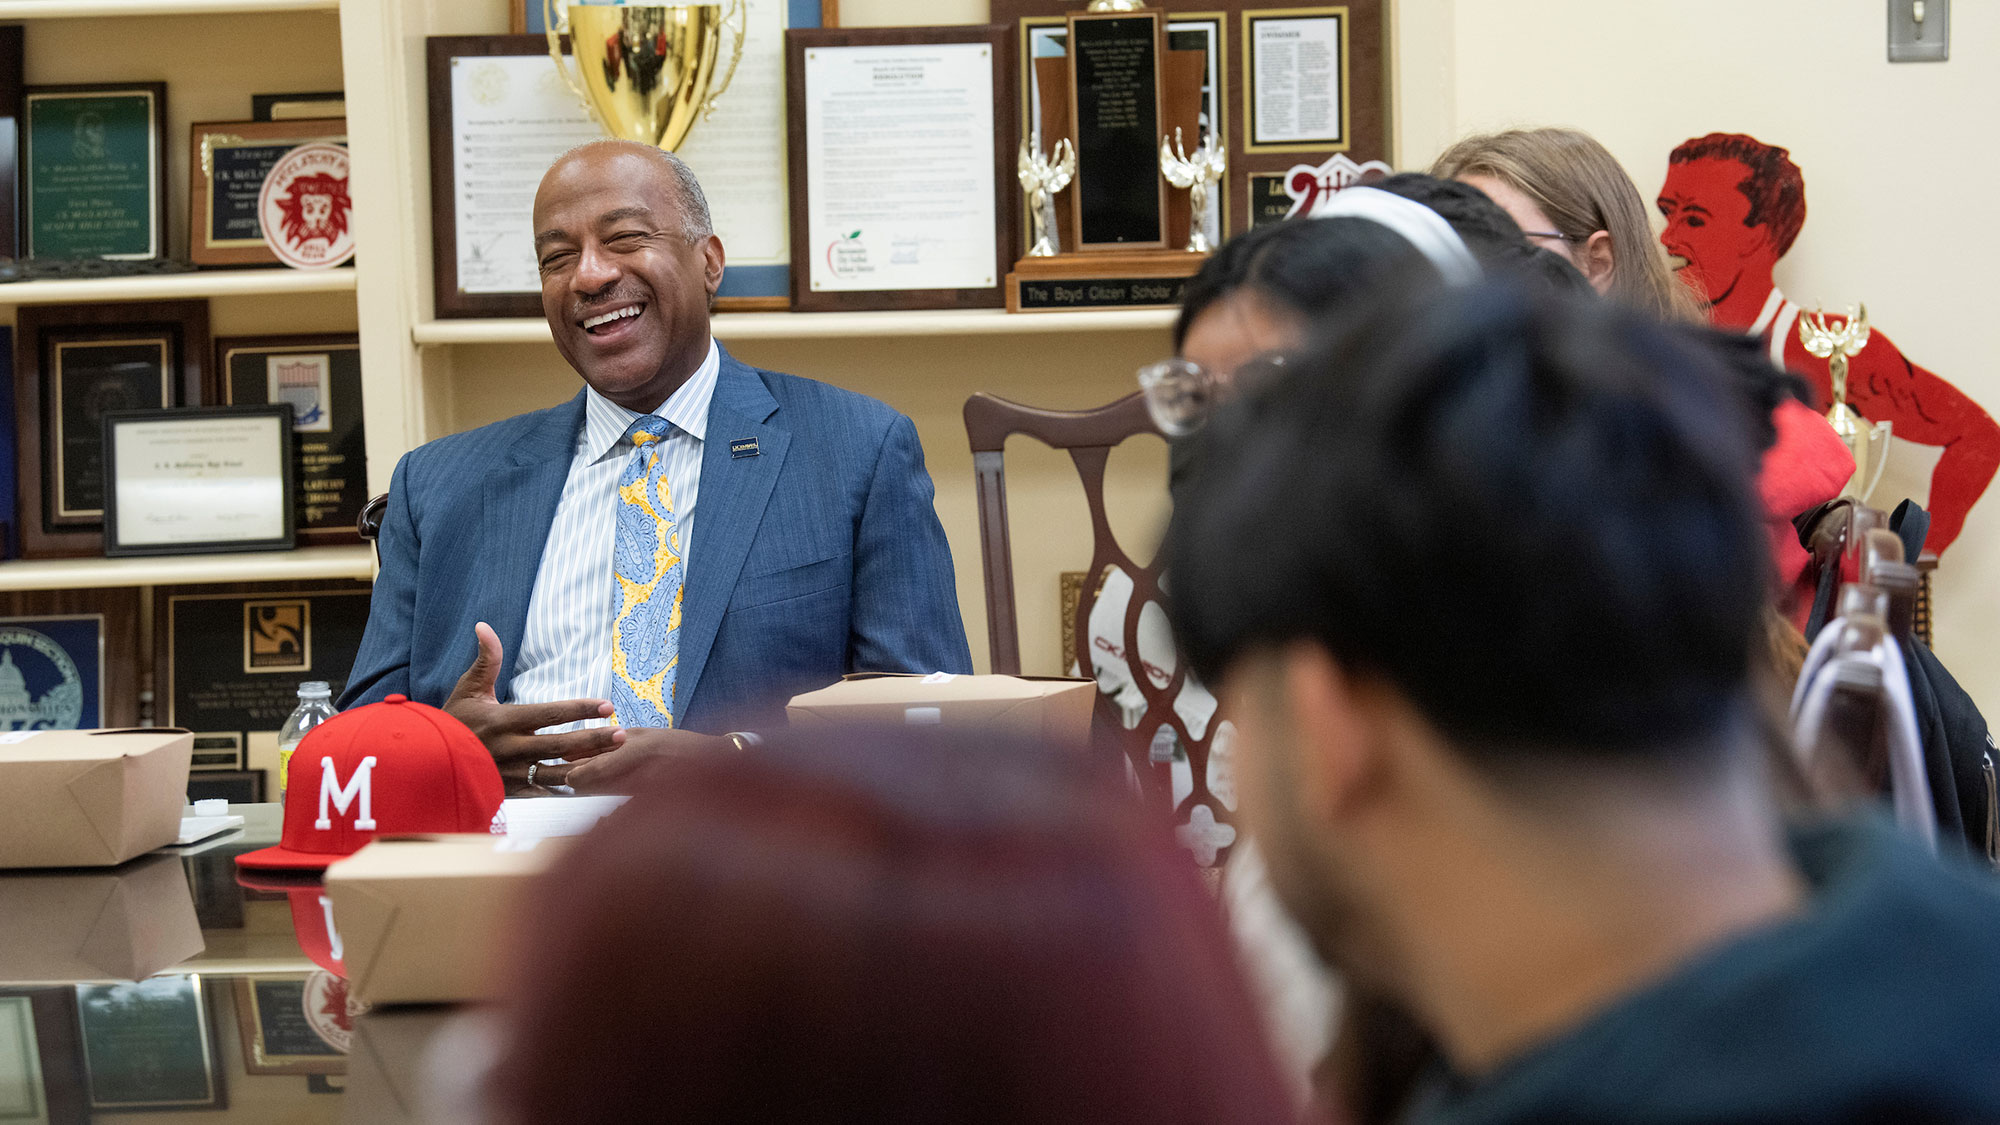 Chancellor Gary S. May seated at a table with high school students